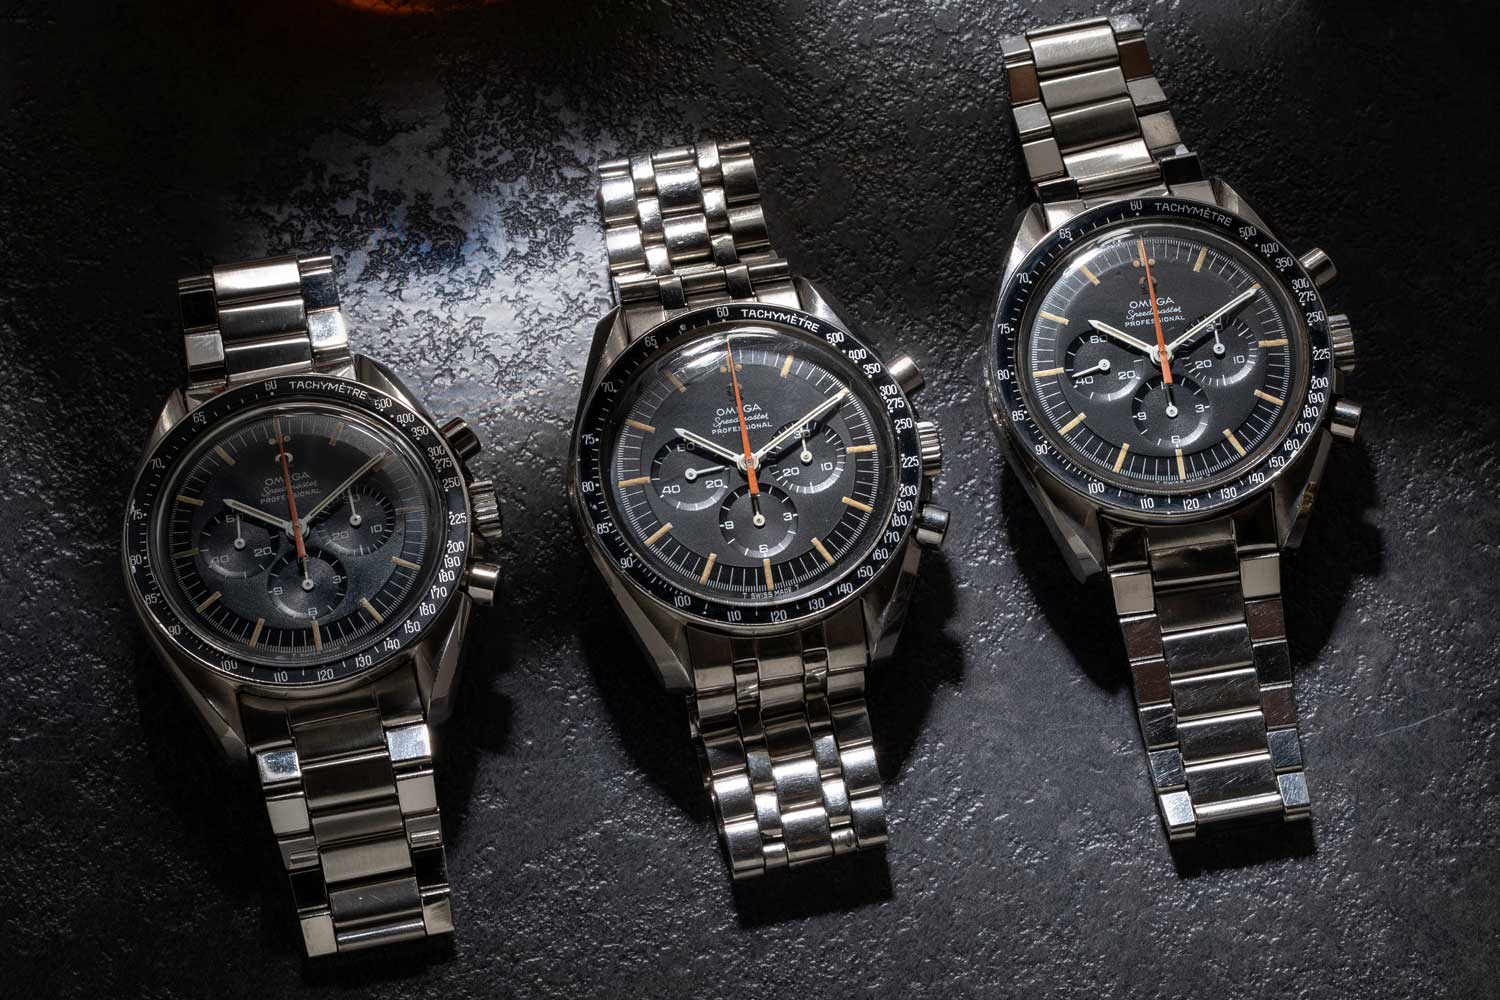 Not one, not two, but THREE examples of the Reference ST 145.012 Omega Speedmaster "Ultraman" that are part of Revolution's permanent Speedmaster collection, at the Revolution Watch Bar (©Revolution)